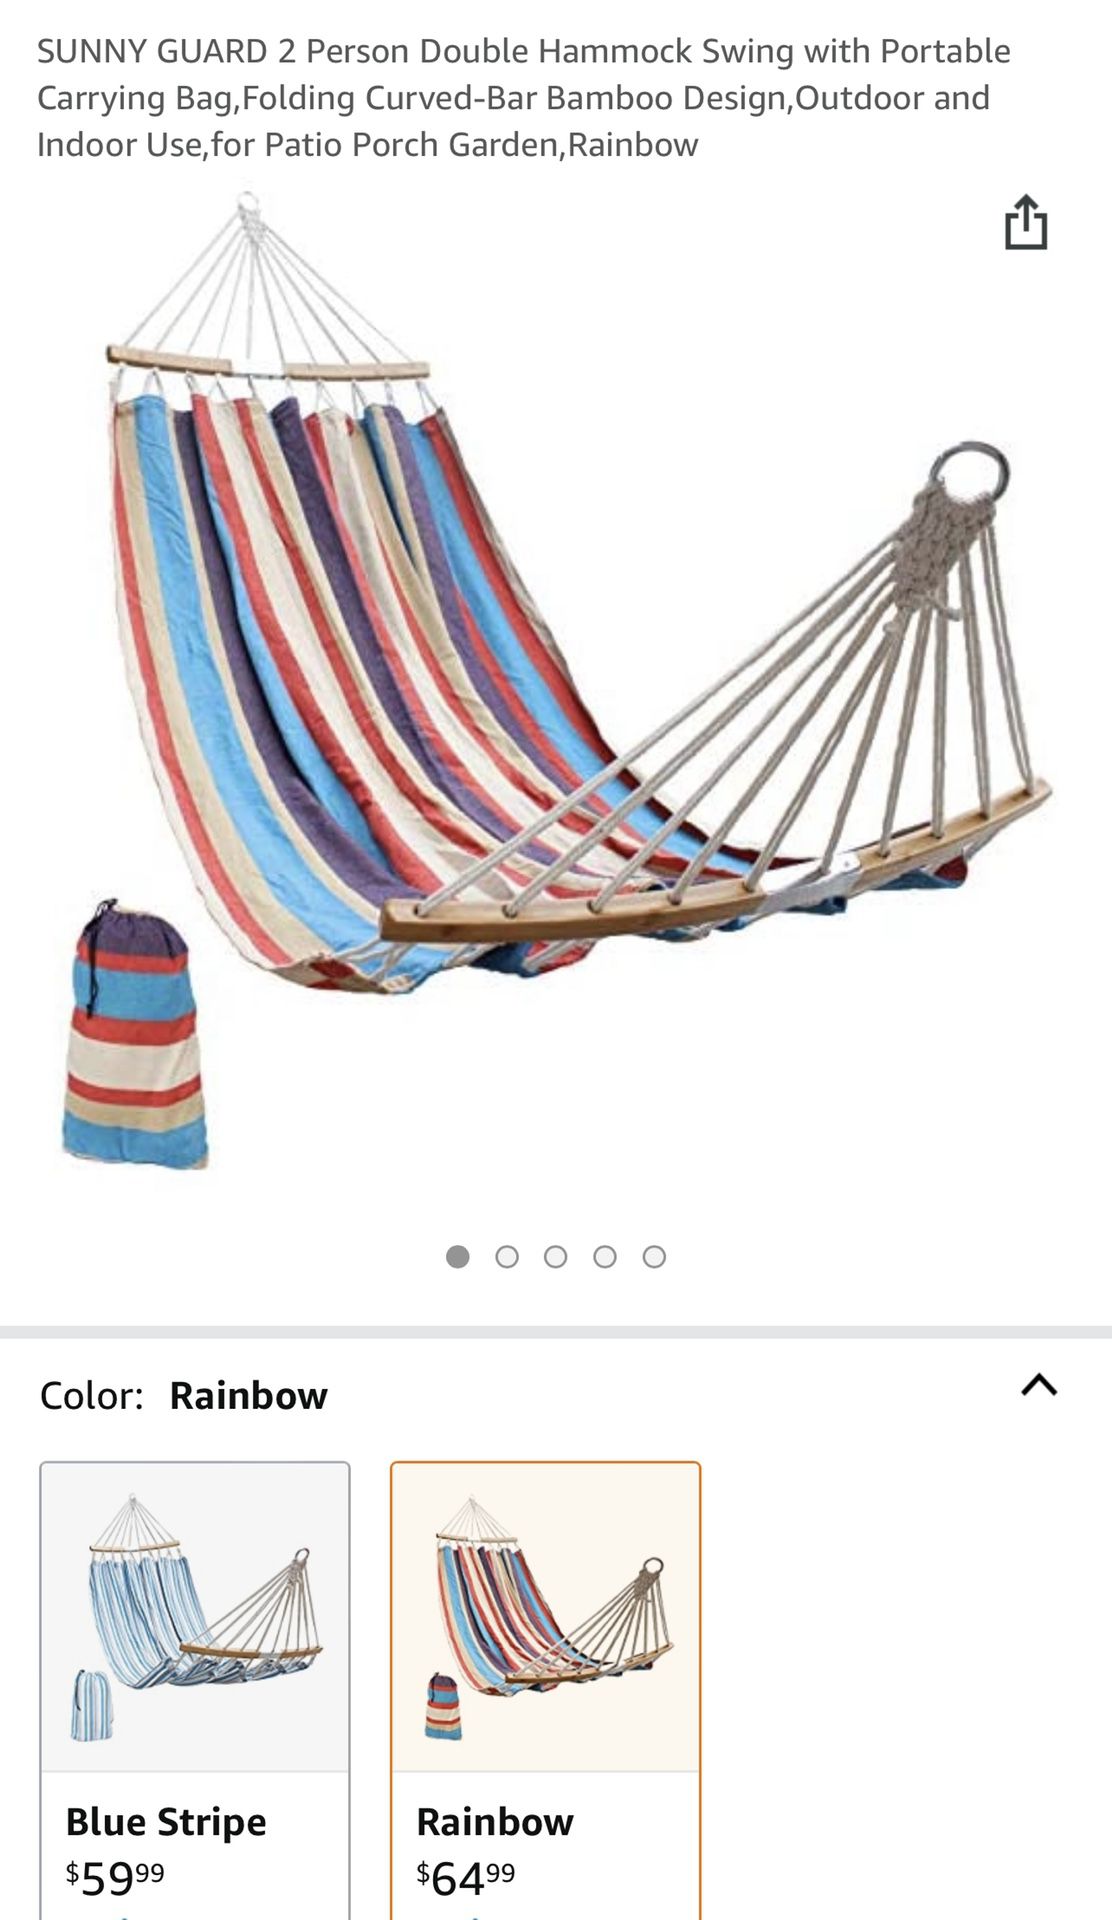 2 Person Double Hammock Swing w/Portable Carrying Bag-Folding Curved/Bar Bamboo Design-Outdoor & Indoor for Patio/Porch/Garden-Rainbow OR Blue Stripe 